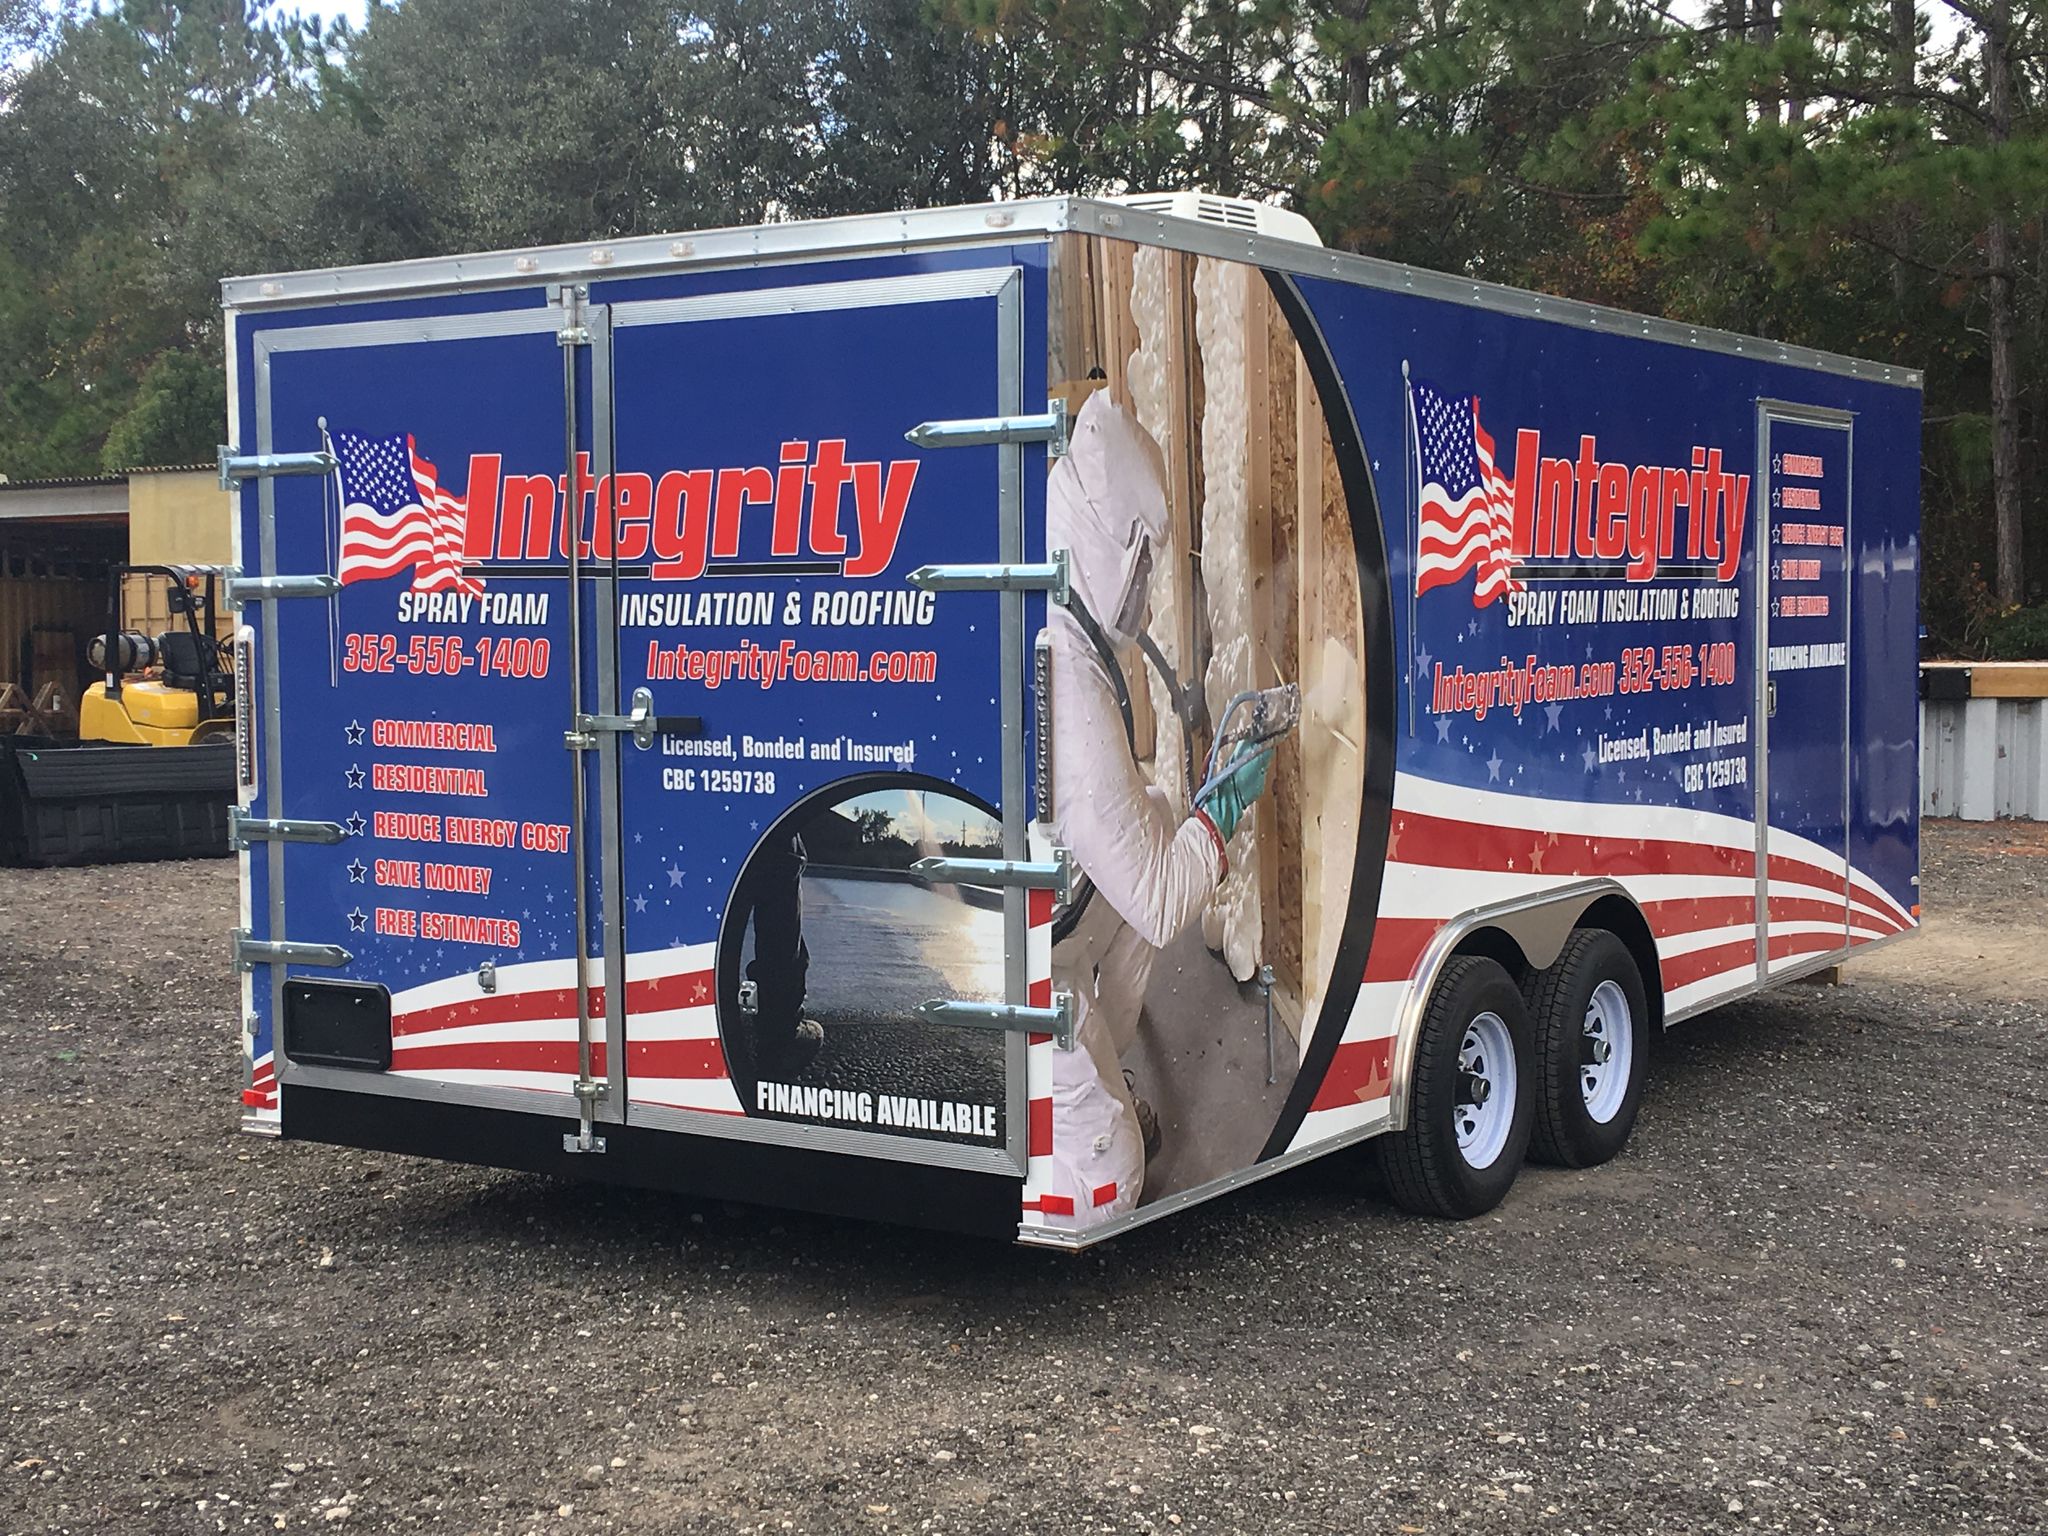 Large commercial two-wheel trailer, wrapped in a custom american flag glossy vinyl trailer wrap. "Integrity" American Flag trailer wrap, designed by Wraps Direct in Jacksonville Florida.